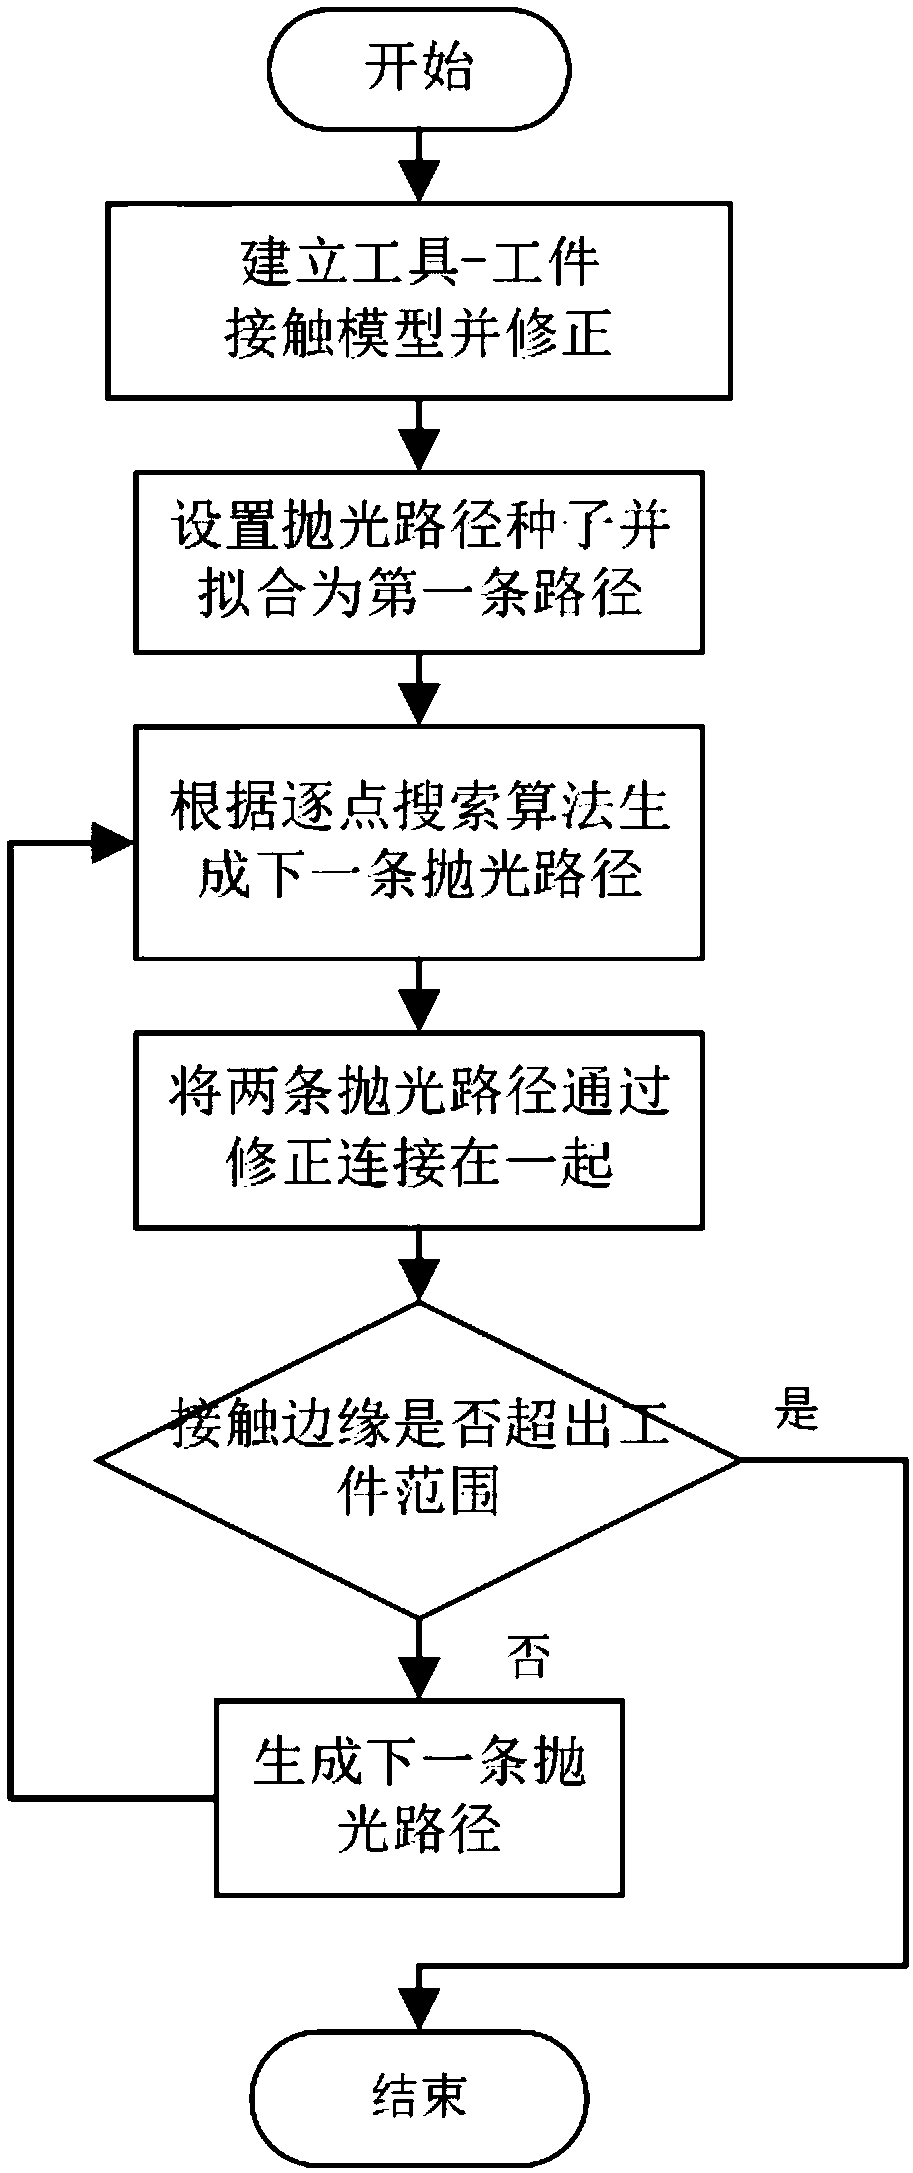 Path generation method for treating aspheric surface in gasbag polishing way